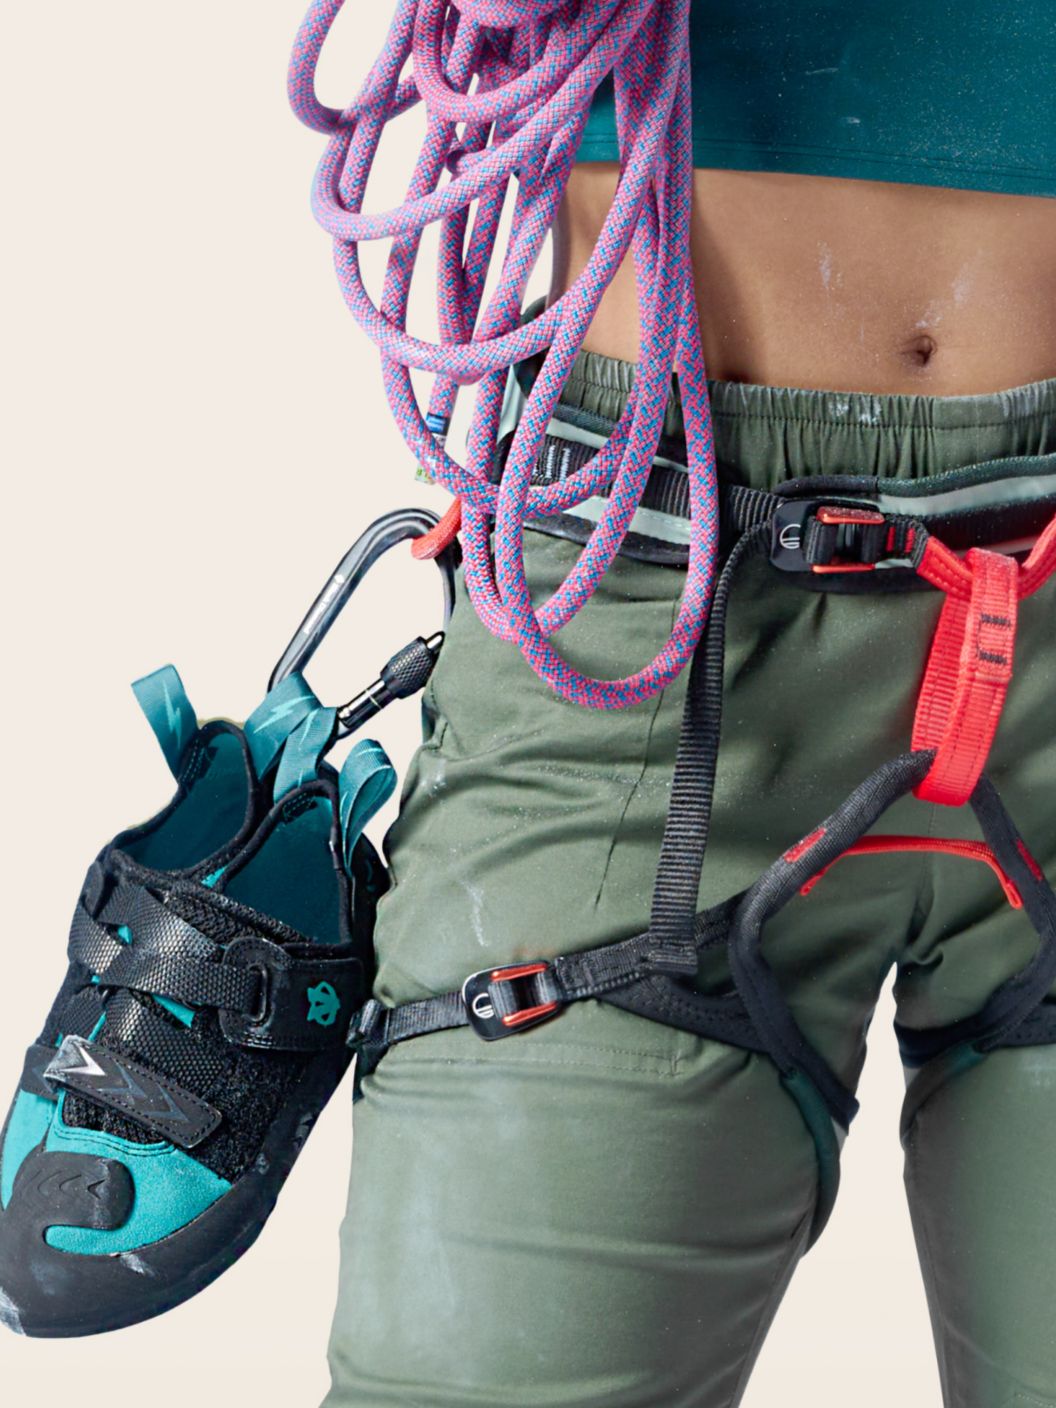 A person wearing a climbing harness with shoes and a rope attached.